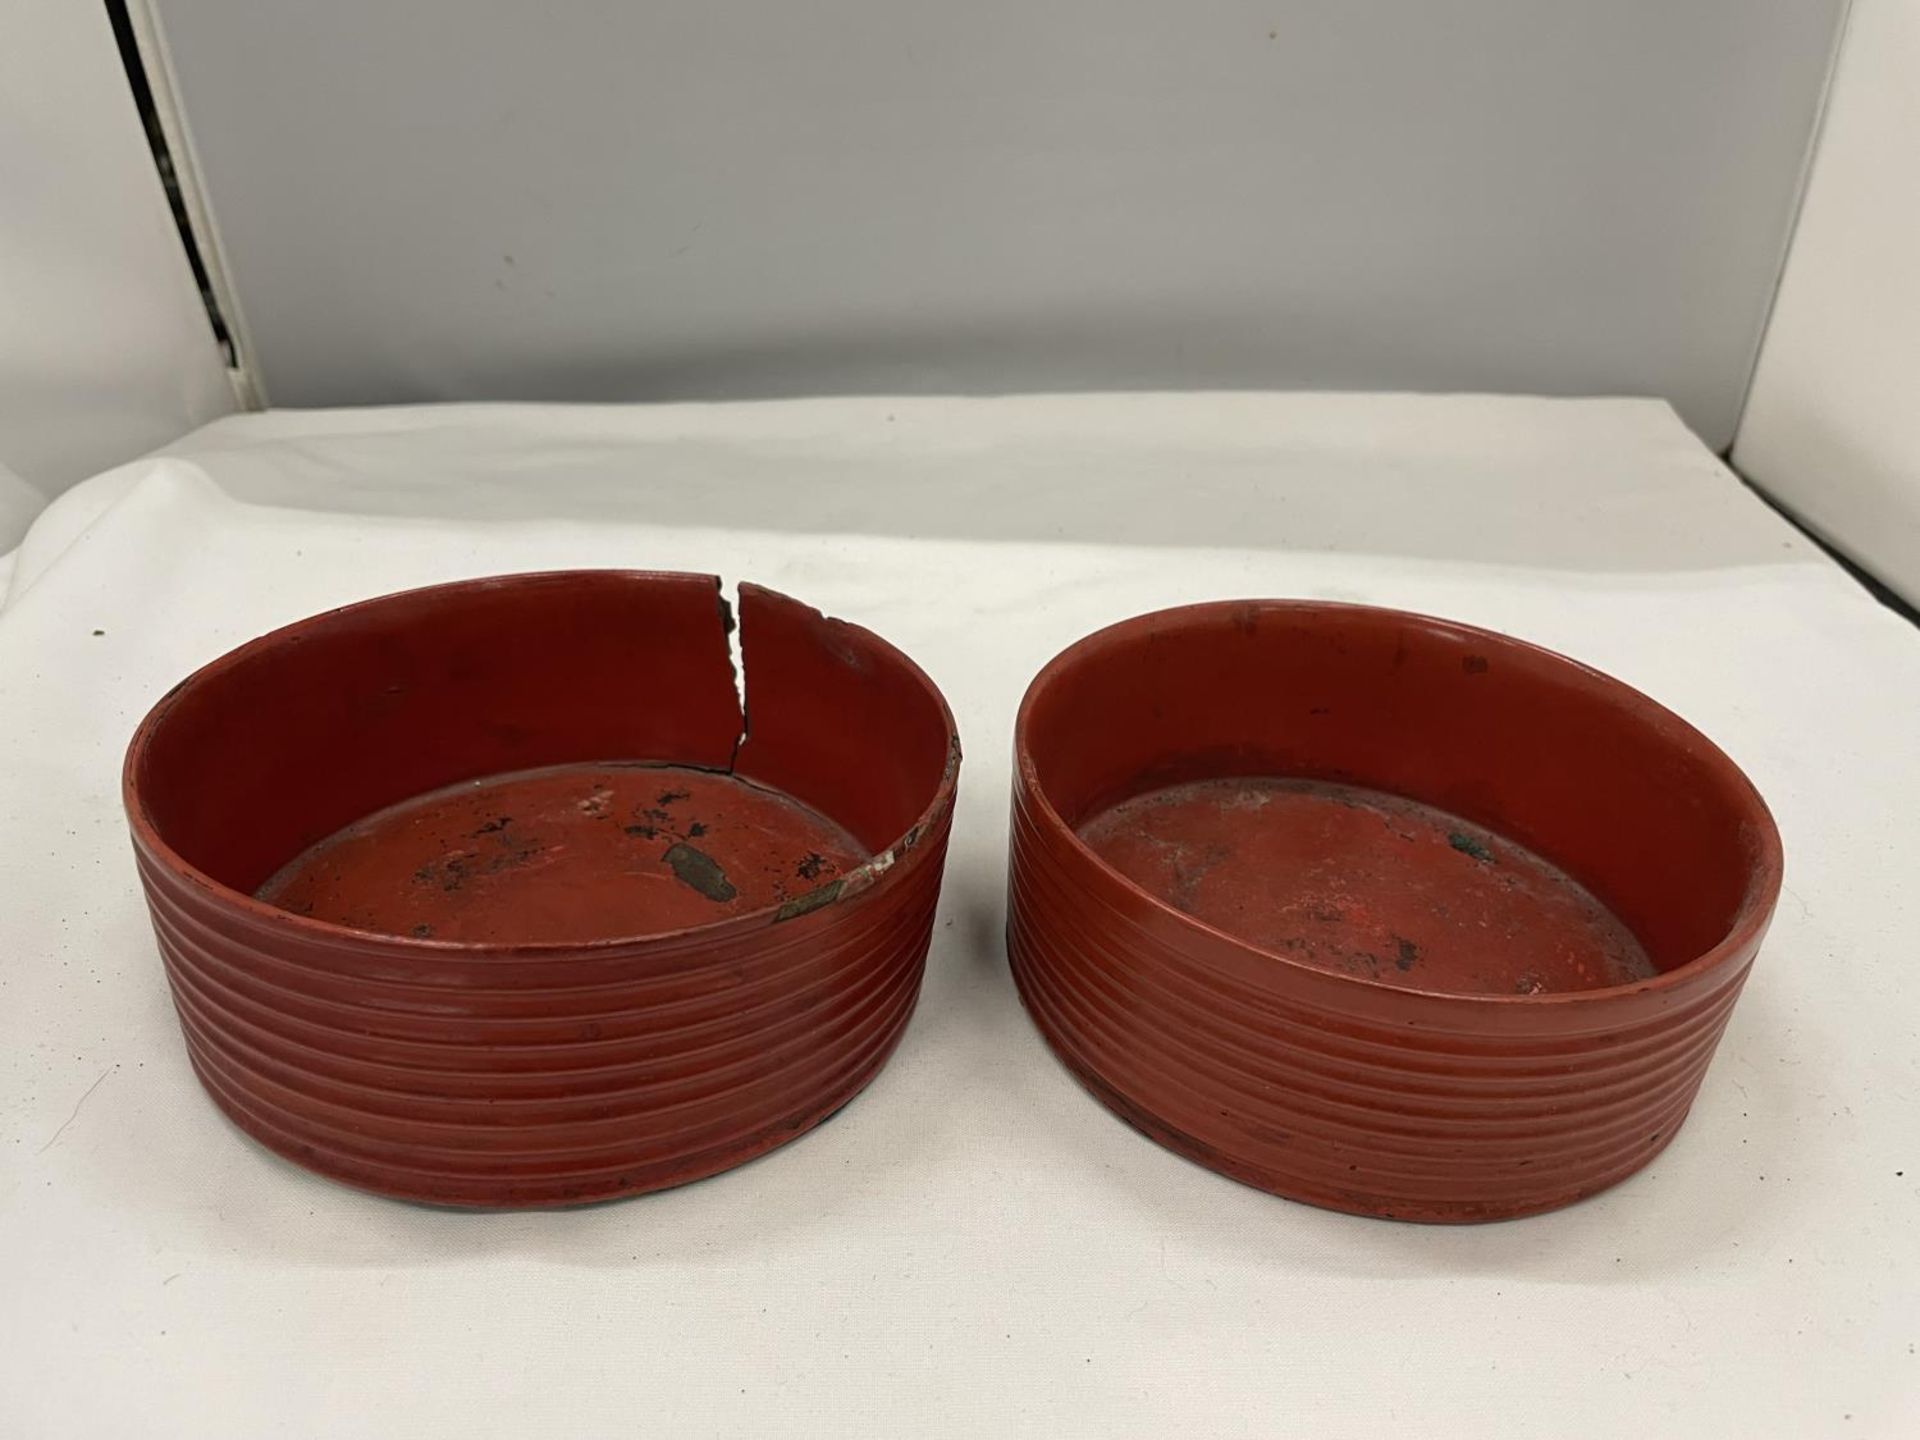 A NEAR PAIR OF BELIEVED ENGLISH REGENCY CIRCA 19TH CENTURY WINE COASTERS IN CINNABAR RED LACQUER